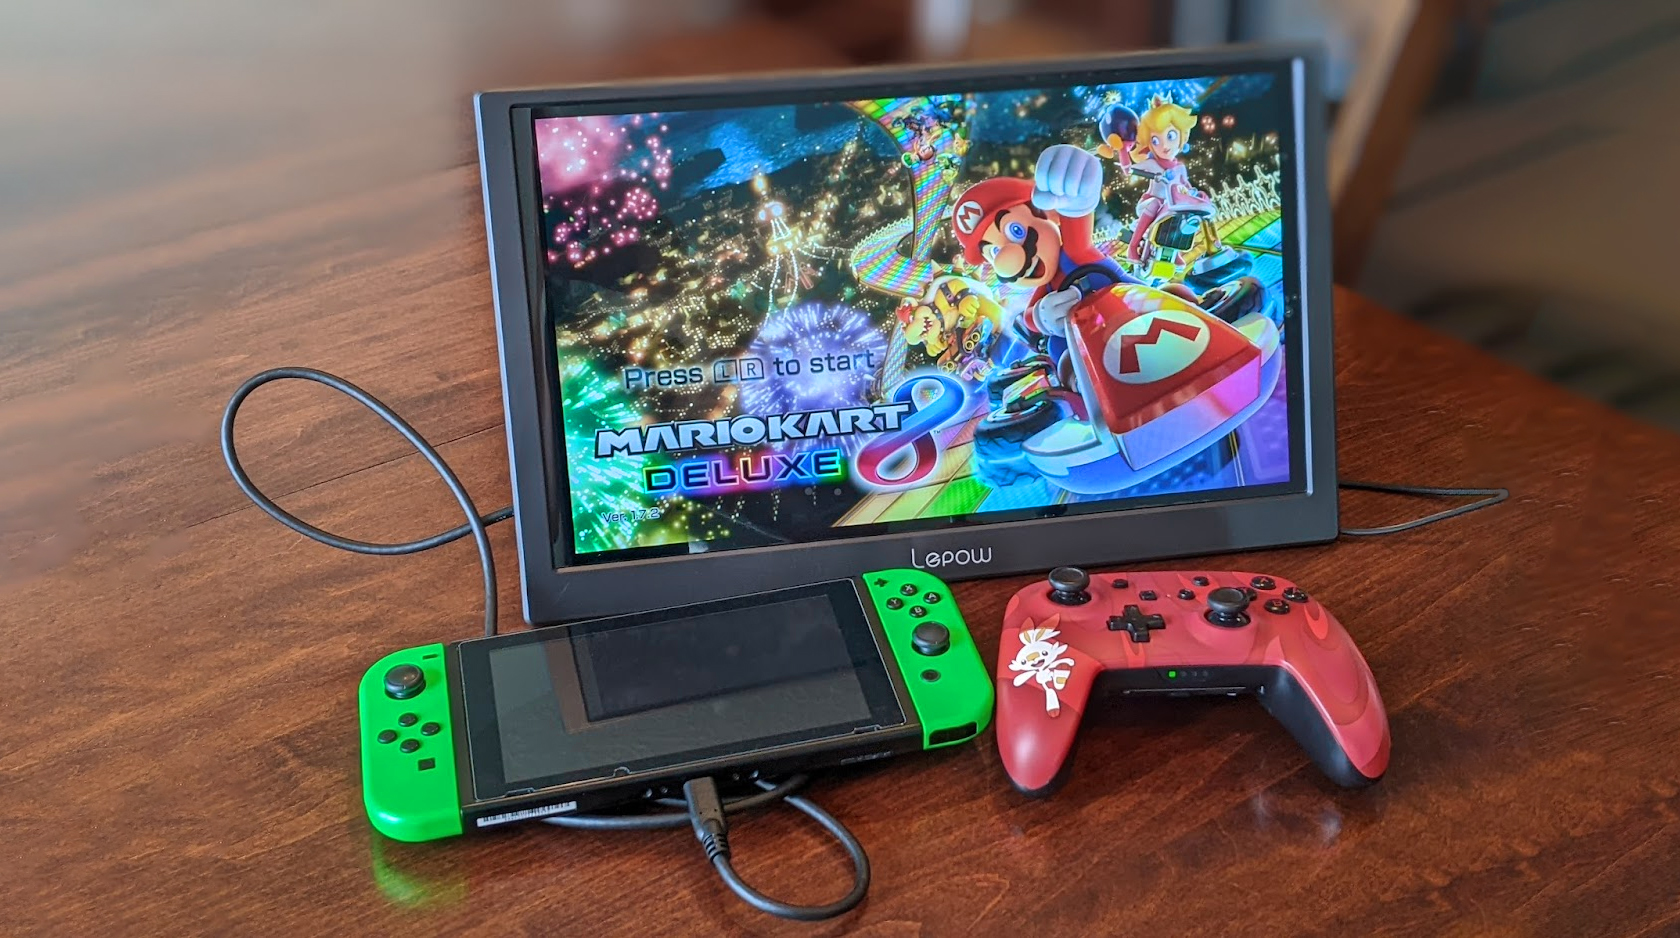 Lepow C2s 15.6 Portable Monitor Connected To Nintendo Switch